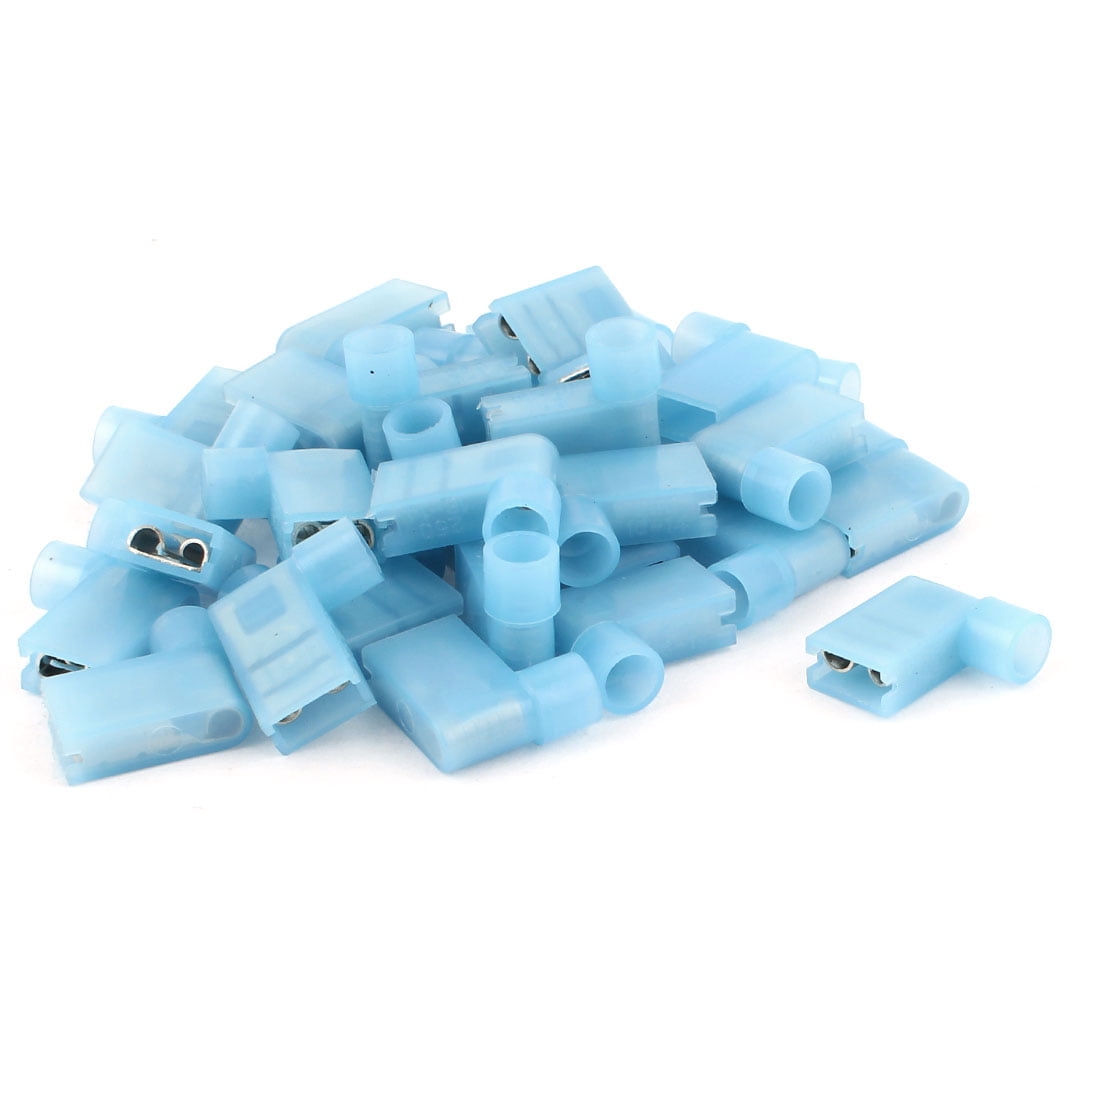 50 x blue insulated flag right angle terminals electrical connector crimp 